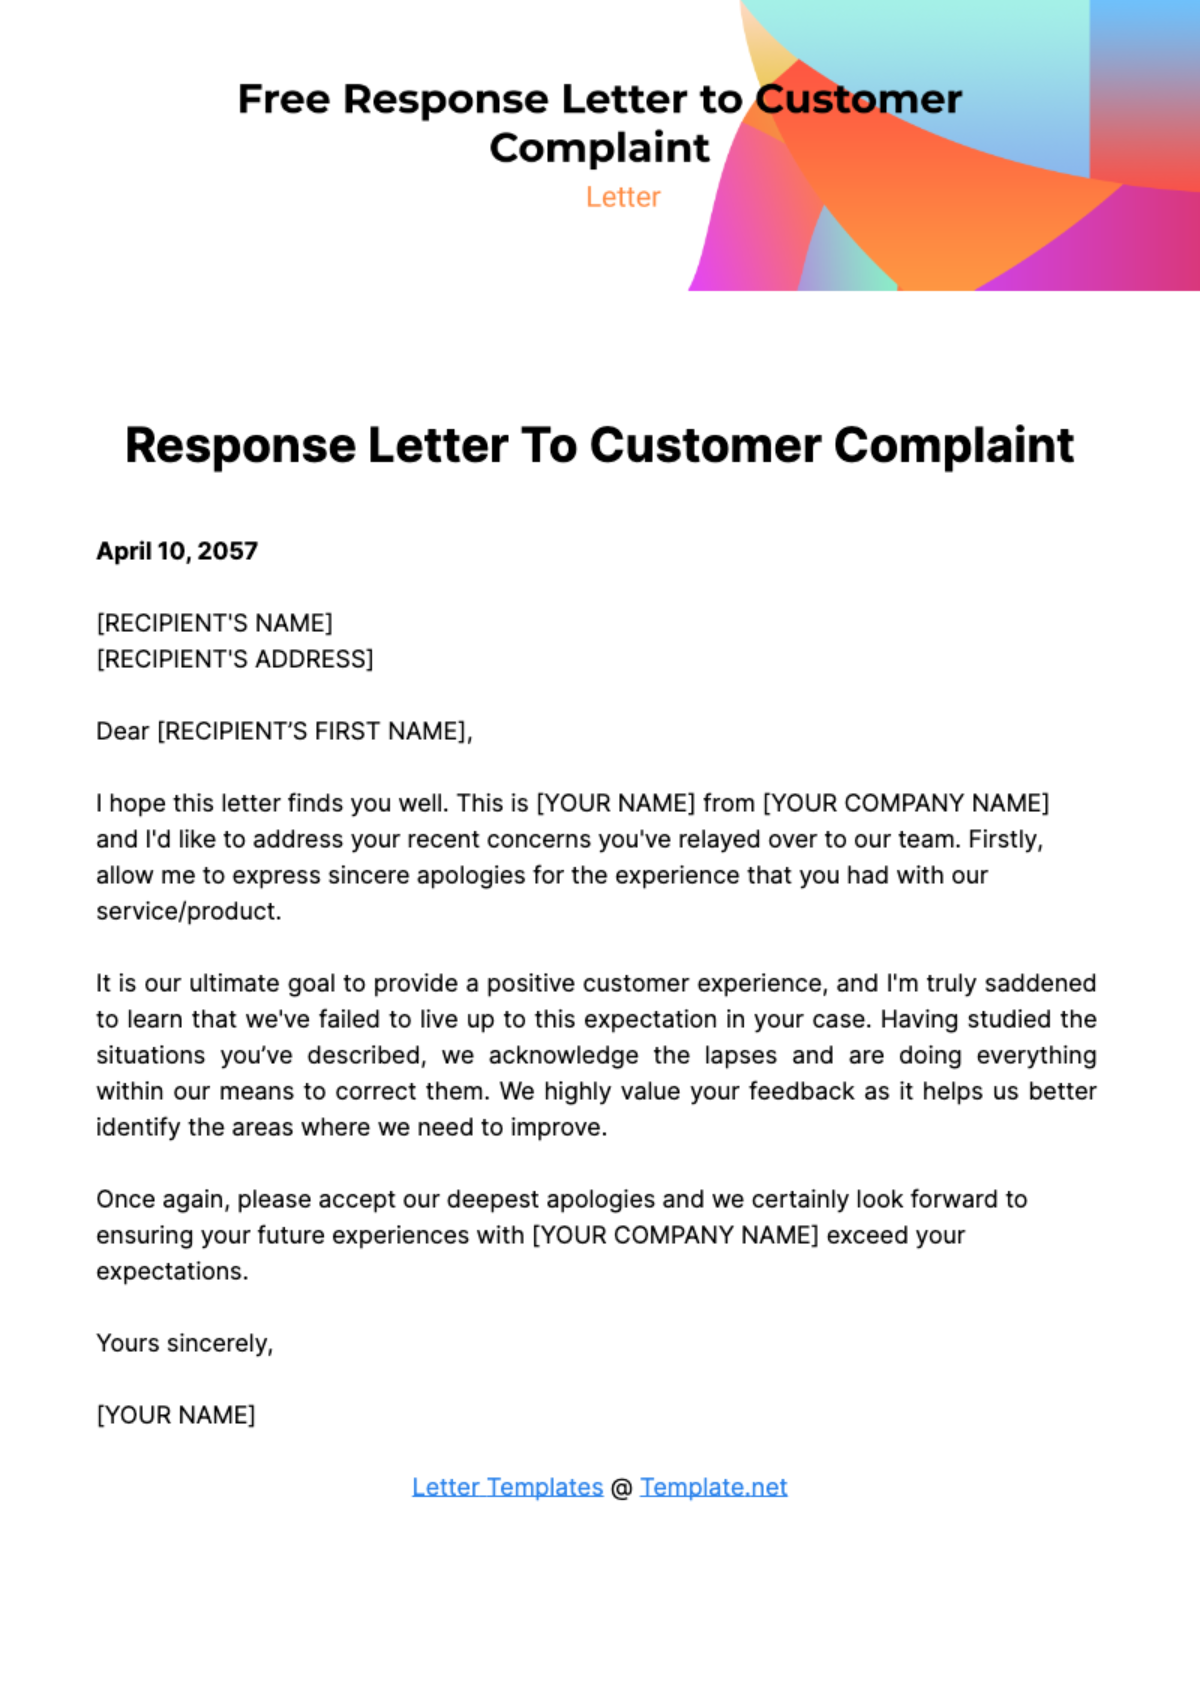 Response Letter to Customer Complaint Template